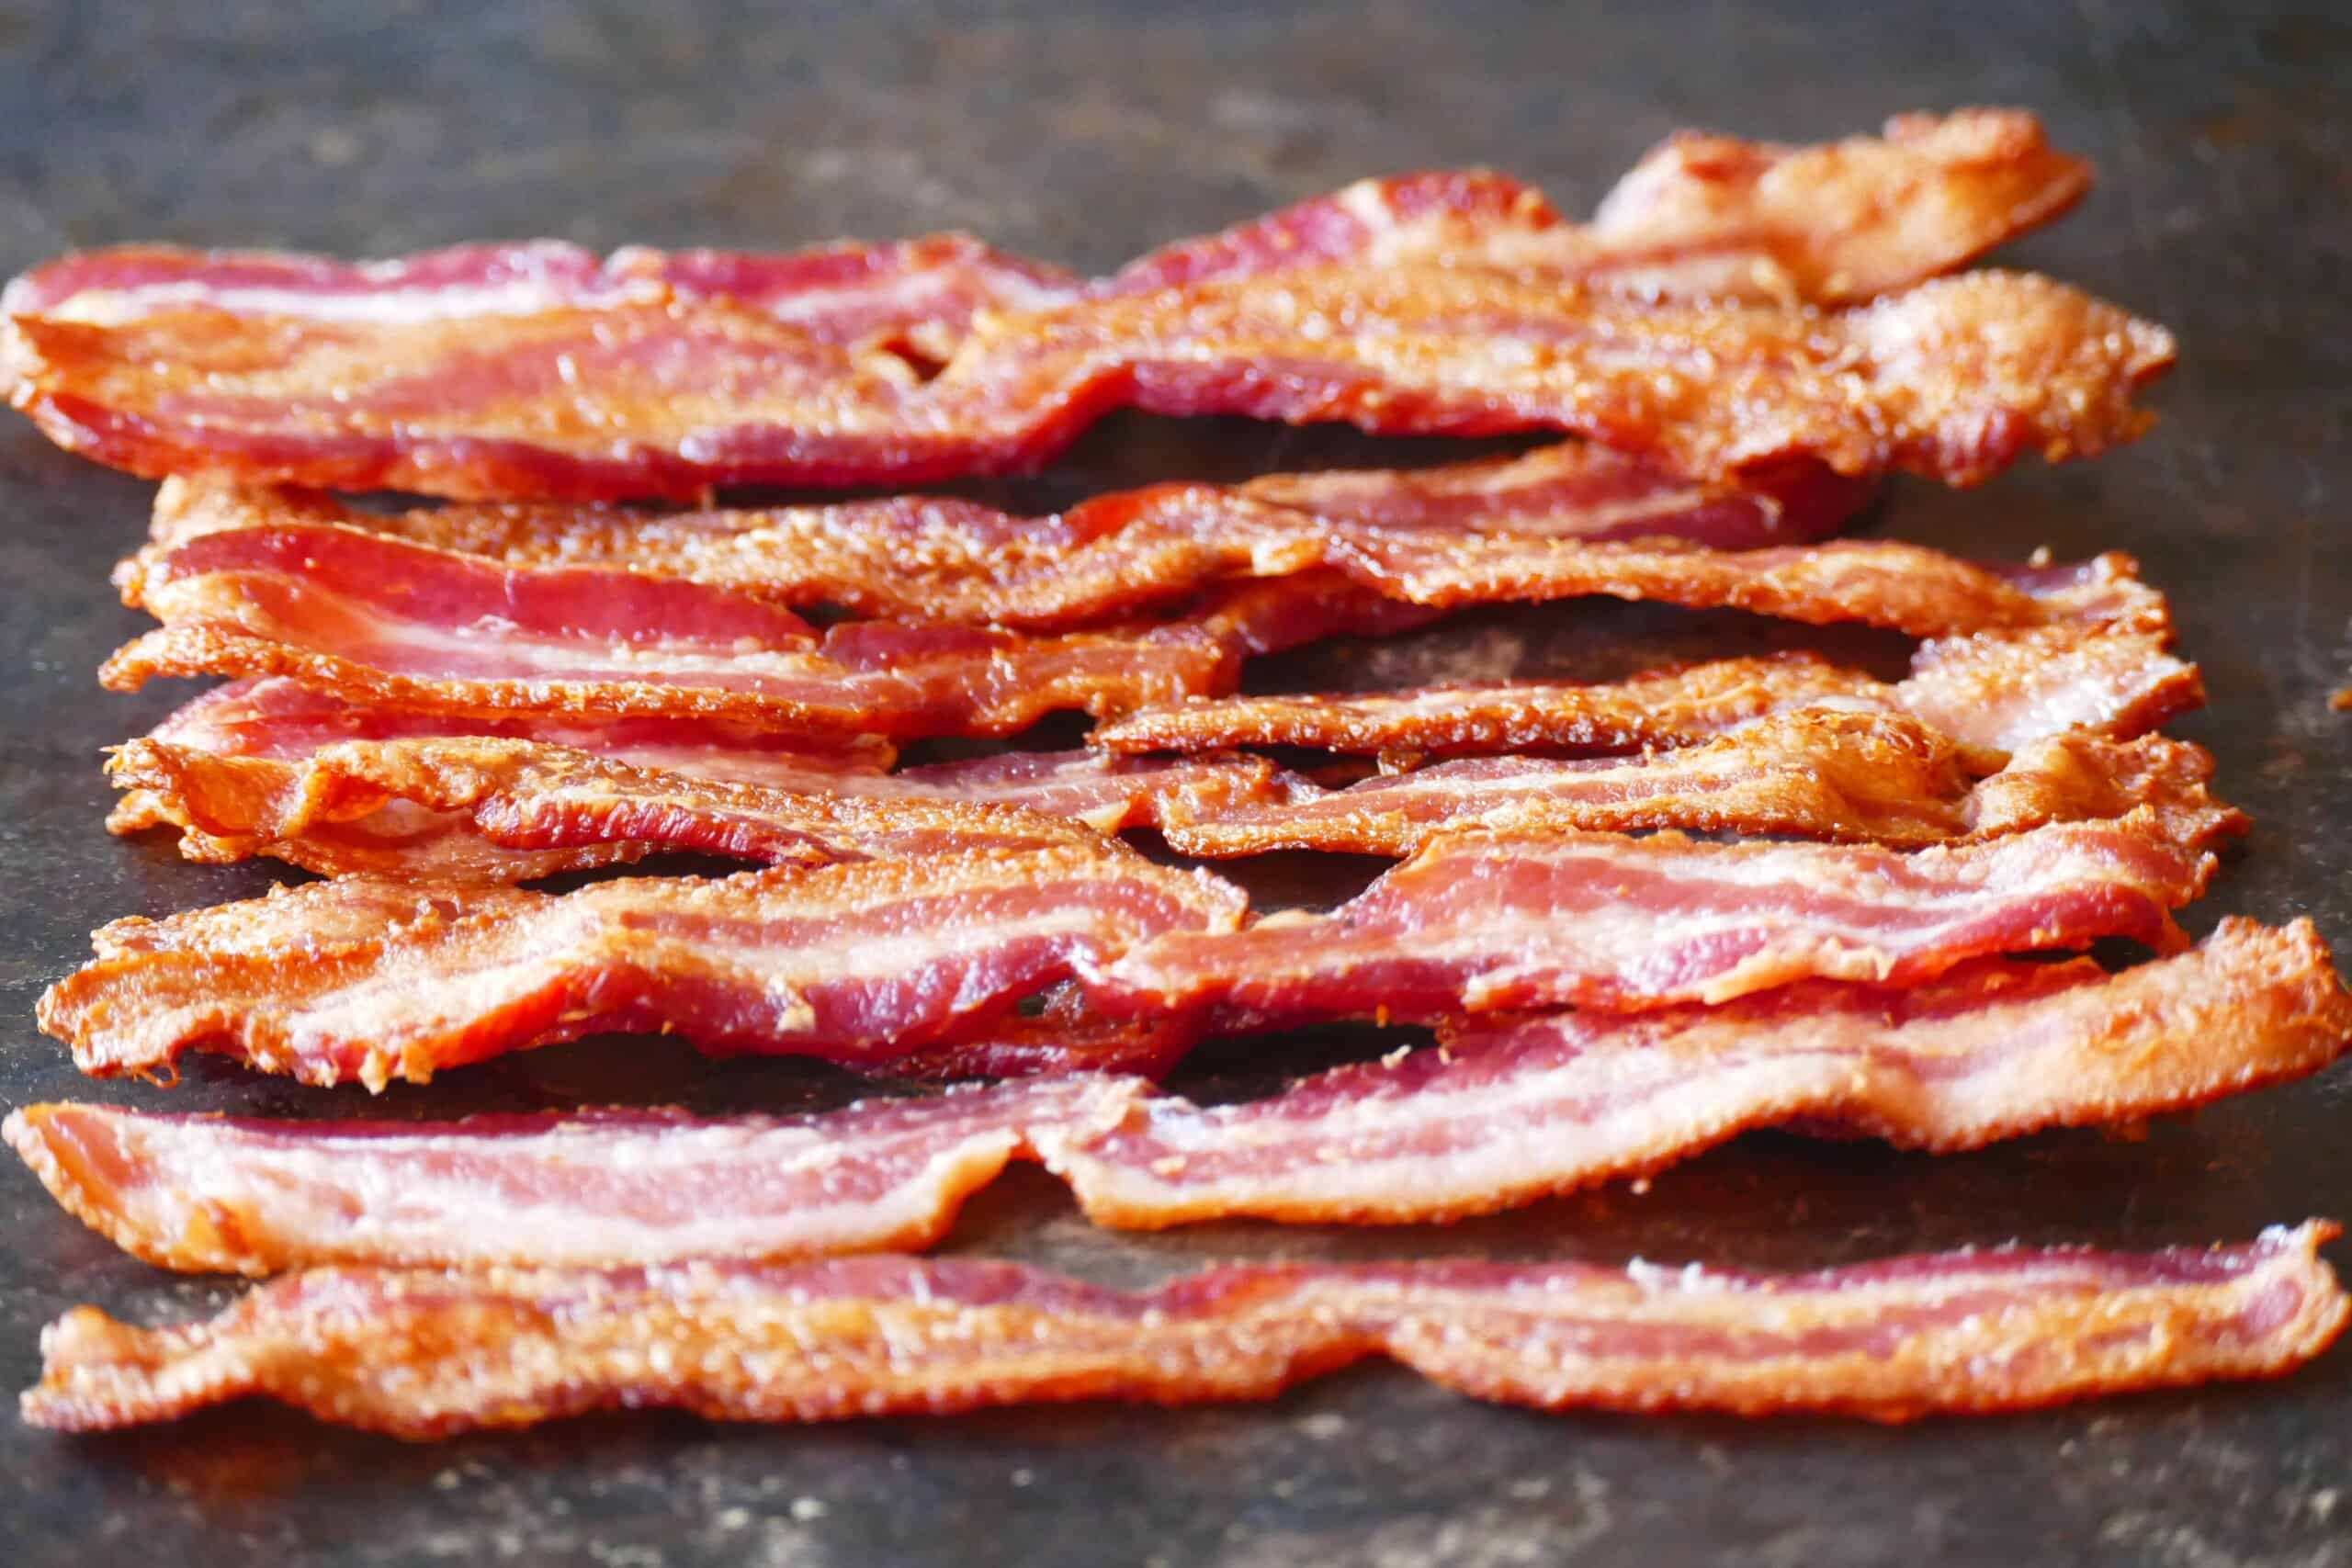 Strips of cooked bacon on black background.